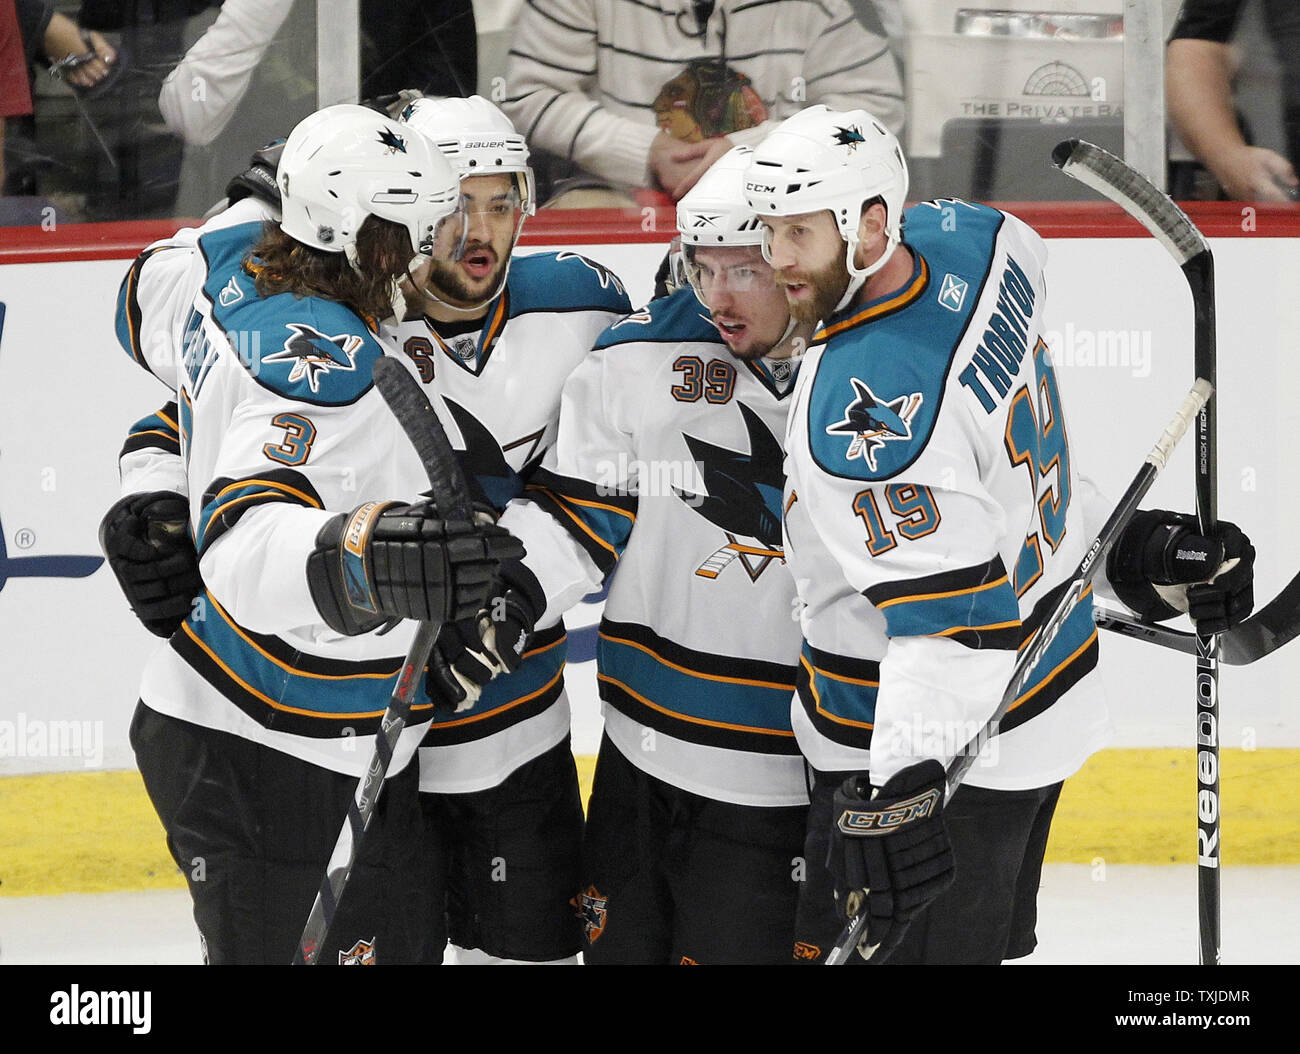 San Jose Sharks defenseman Douglas Murray, right wing Devin Setoguchi, center Logan Couture and center Joe Thornton celebrate Couture's goal during the first period of game 4 of the NHL Western Conference Finals against the Chicago Blackhawks at the United Center in Chicago  on May 23, 2010.     UPI/Brian Kersey Stock Photo